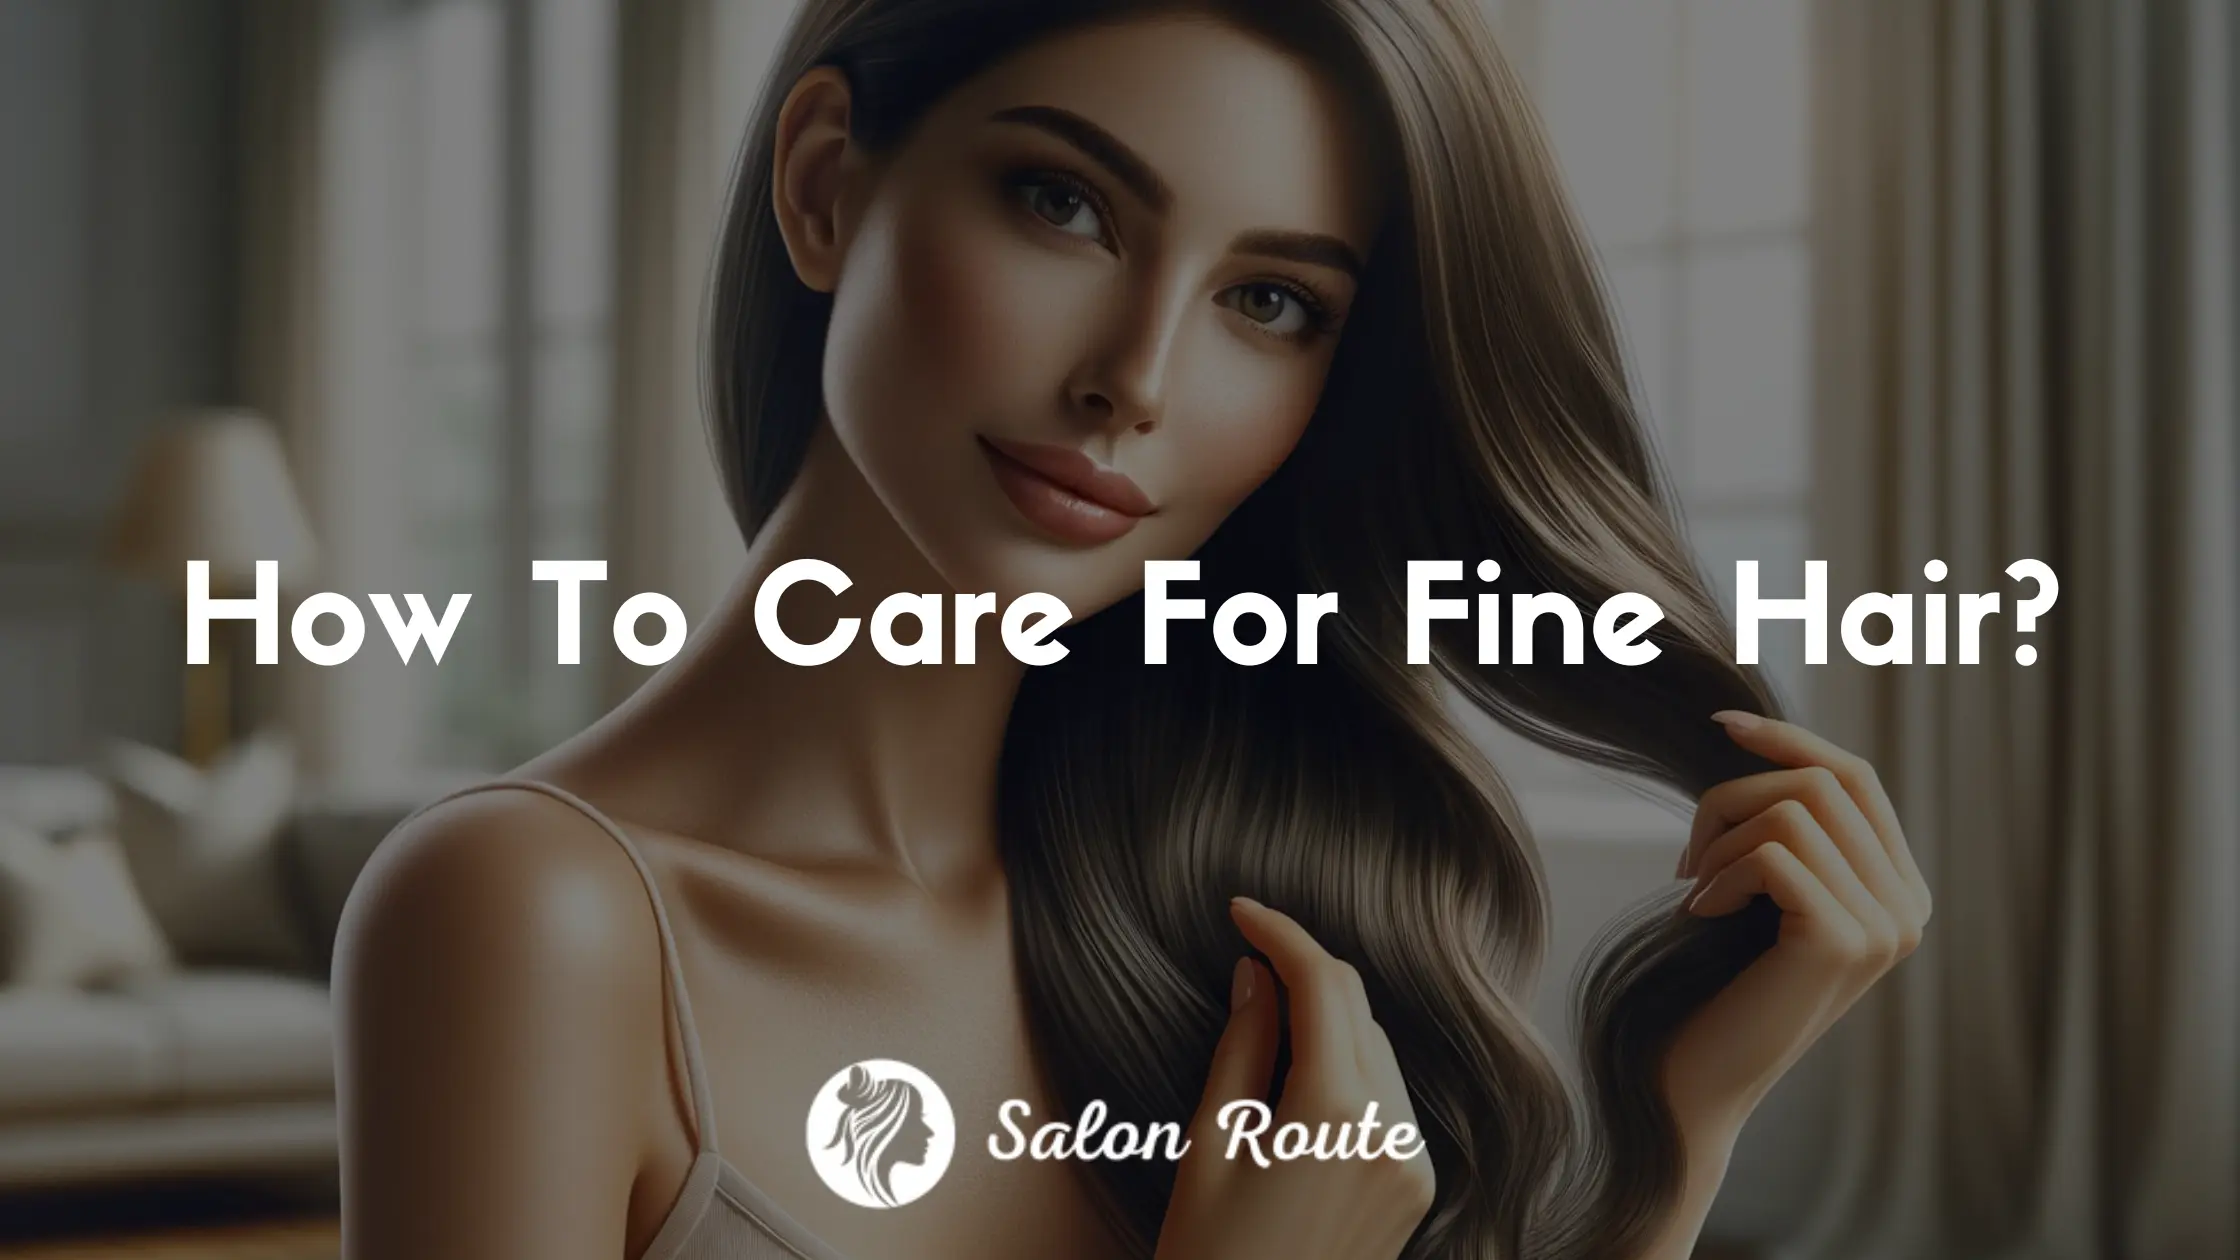 How To Care For Fine Hair?